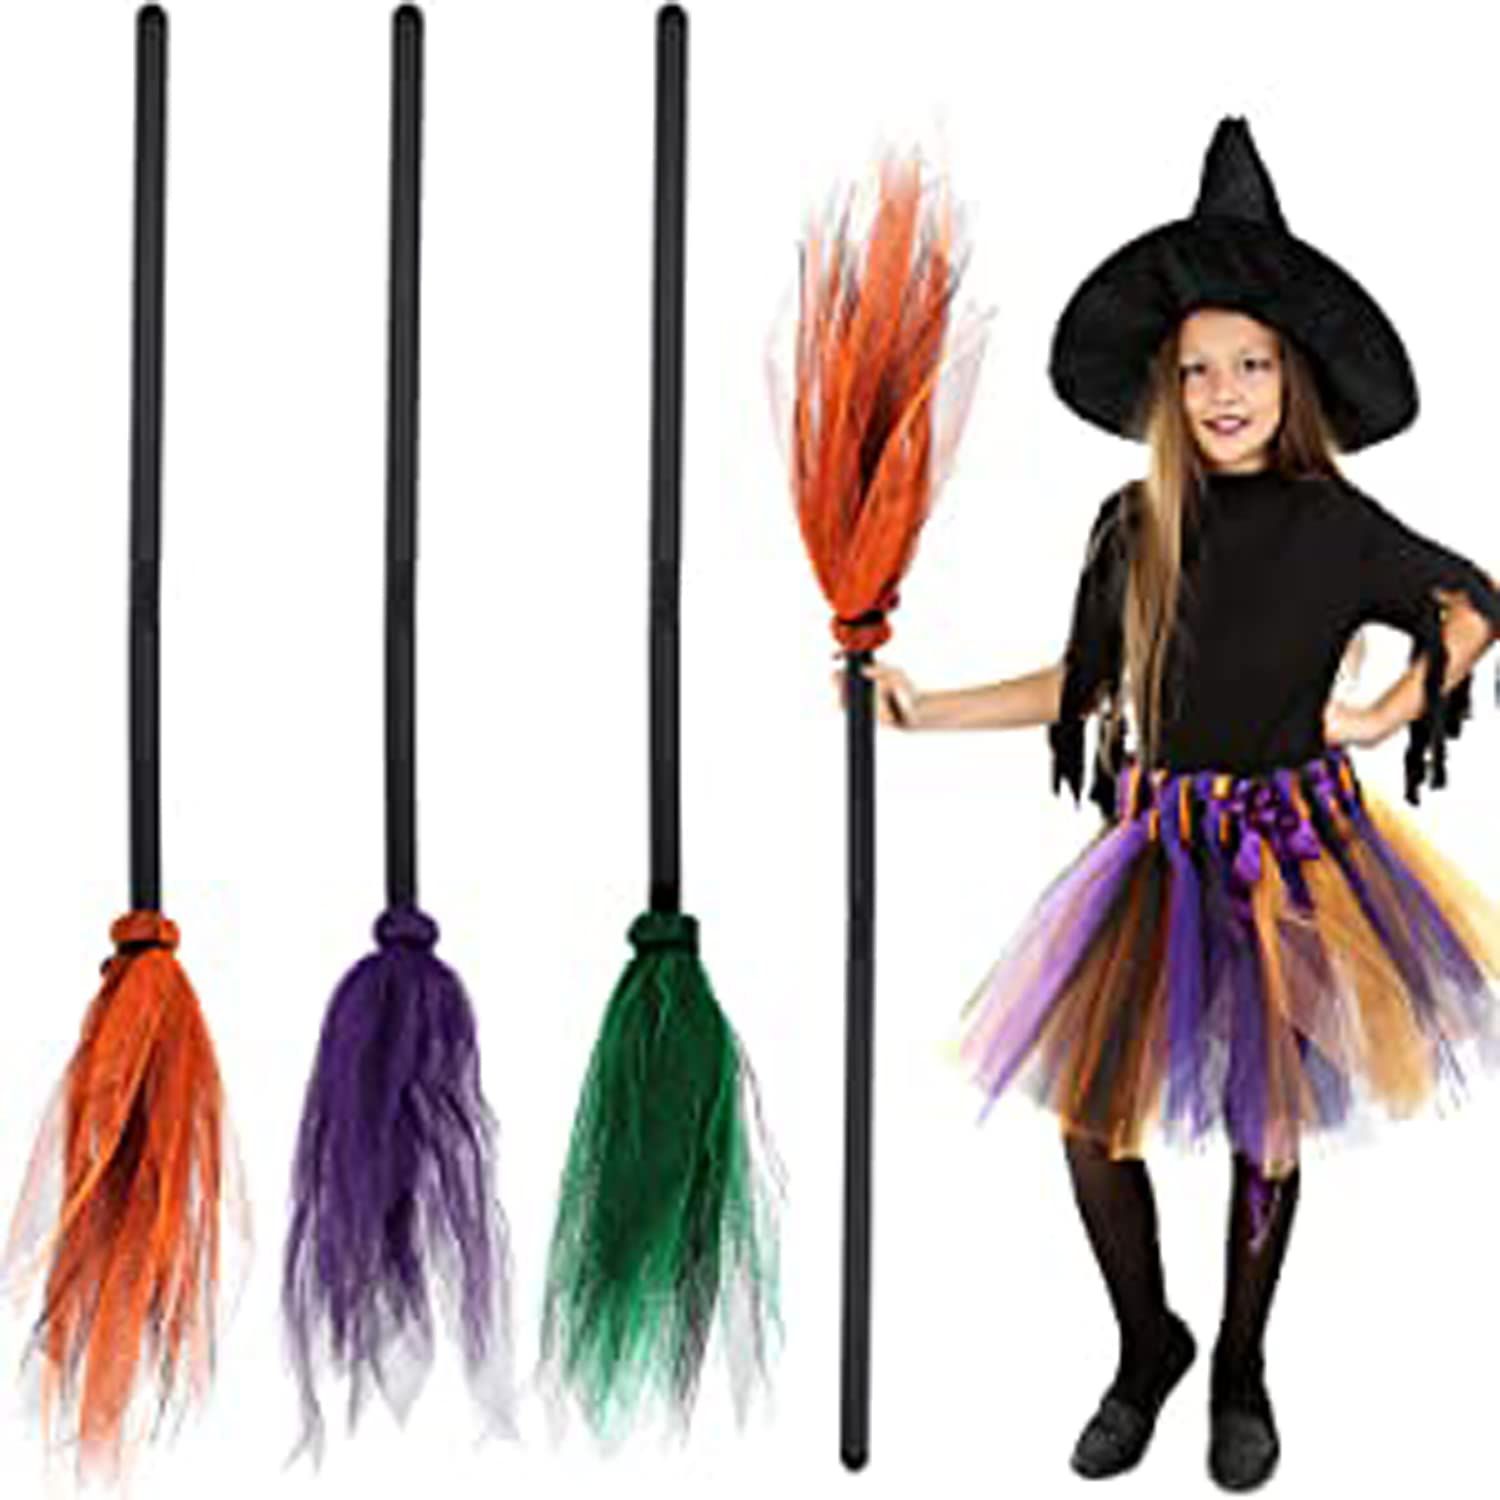     			Kaku Fancy Dresses Halloween Witch Broom - 2pcs | Witch Broomstick Wizard Flying Broom Stick | Halloween Cosplay Costume for Haunted Horror Costume Decoration Supplies